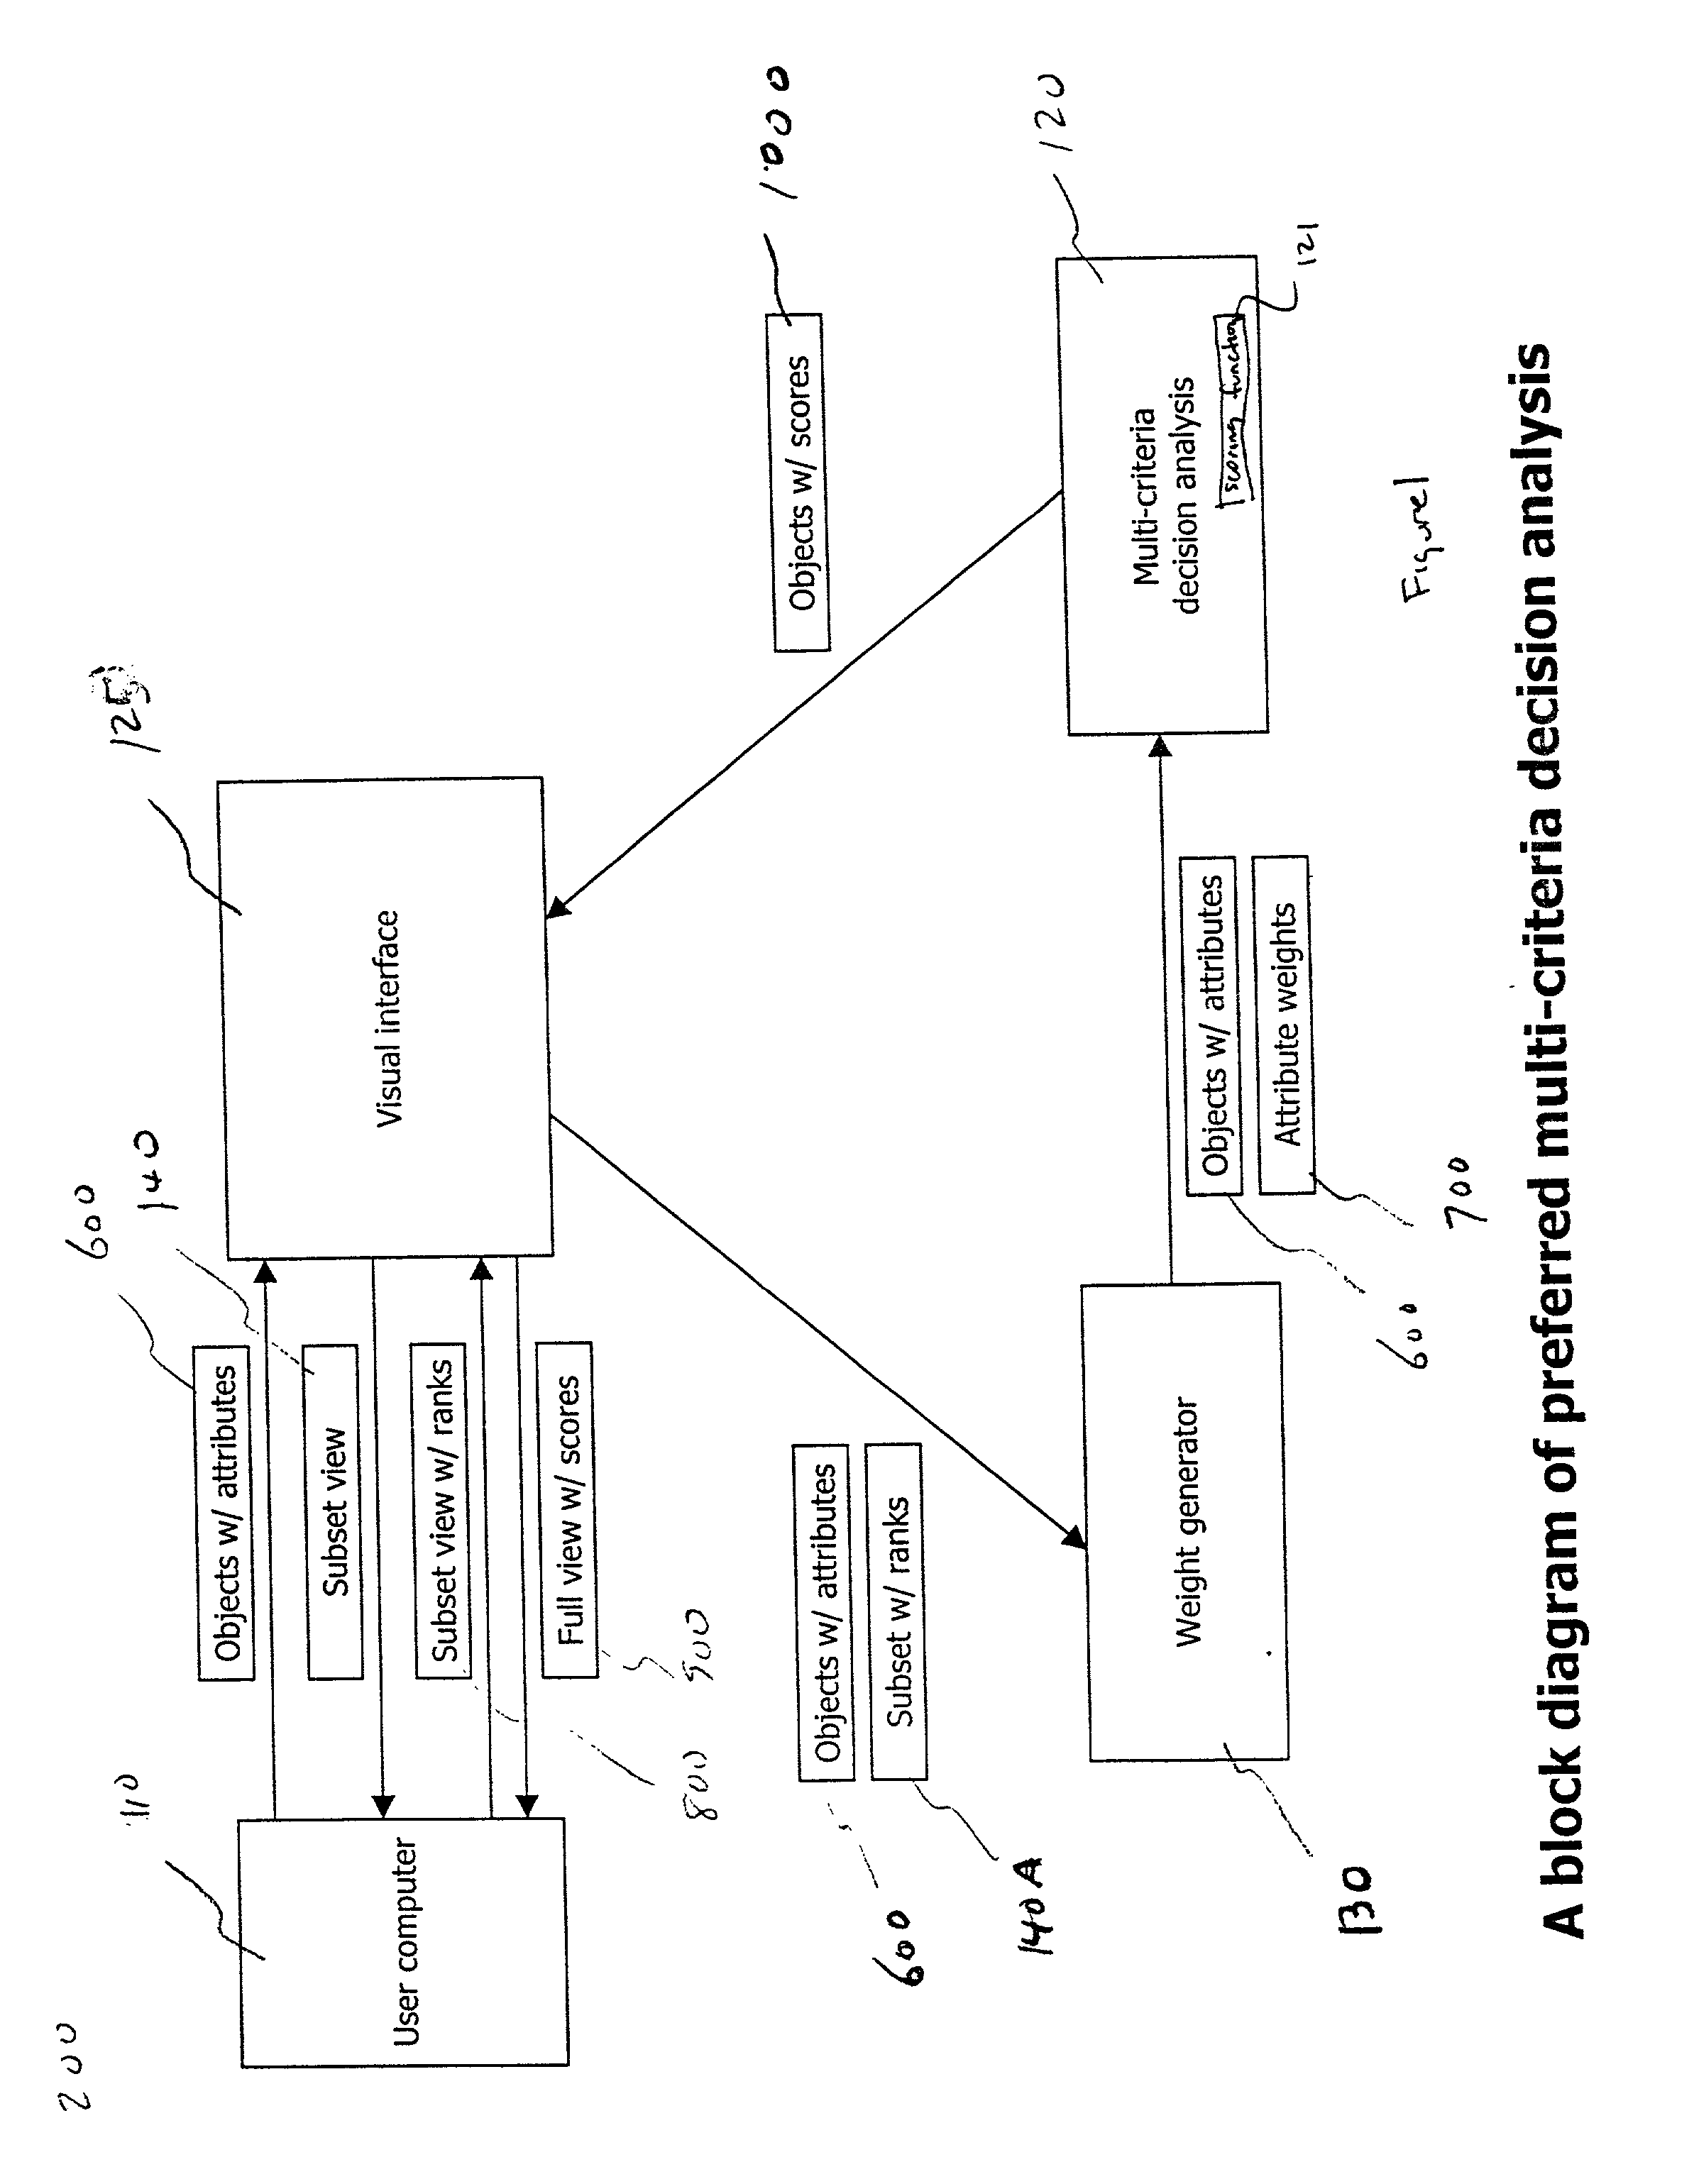 System and method for ranking objects having multiple attributes